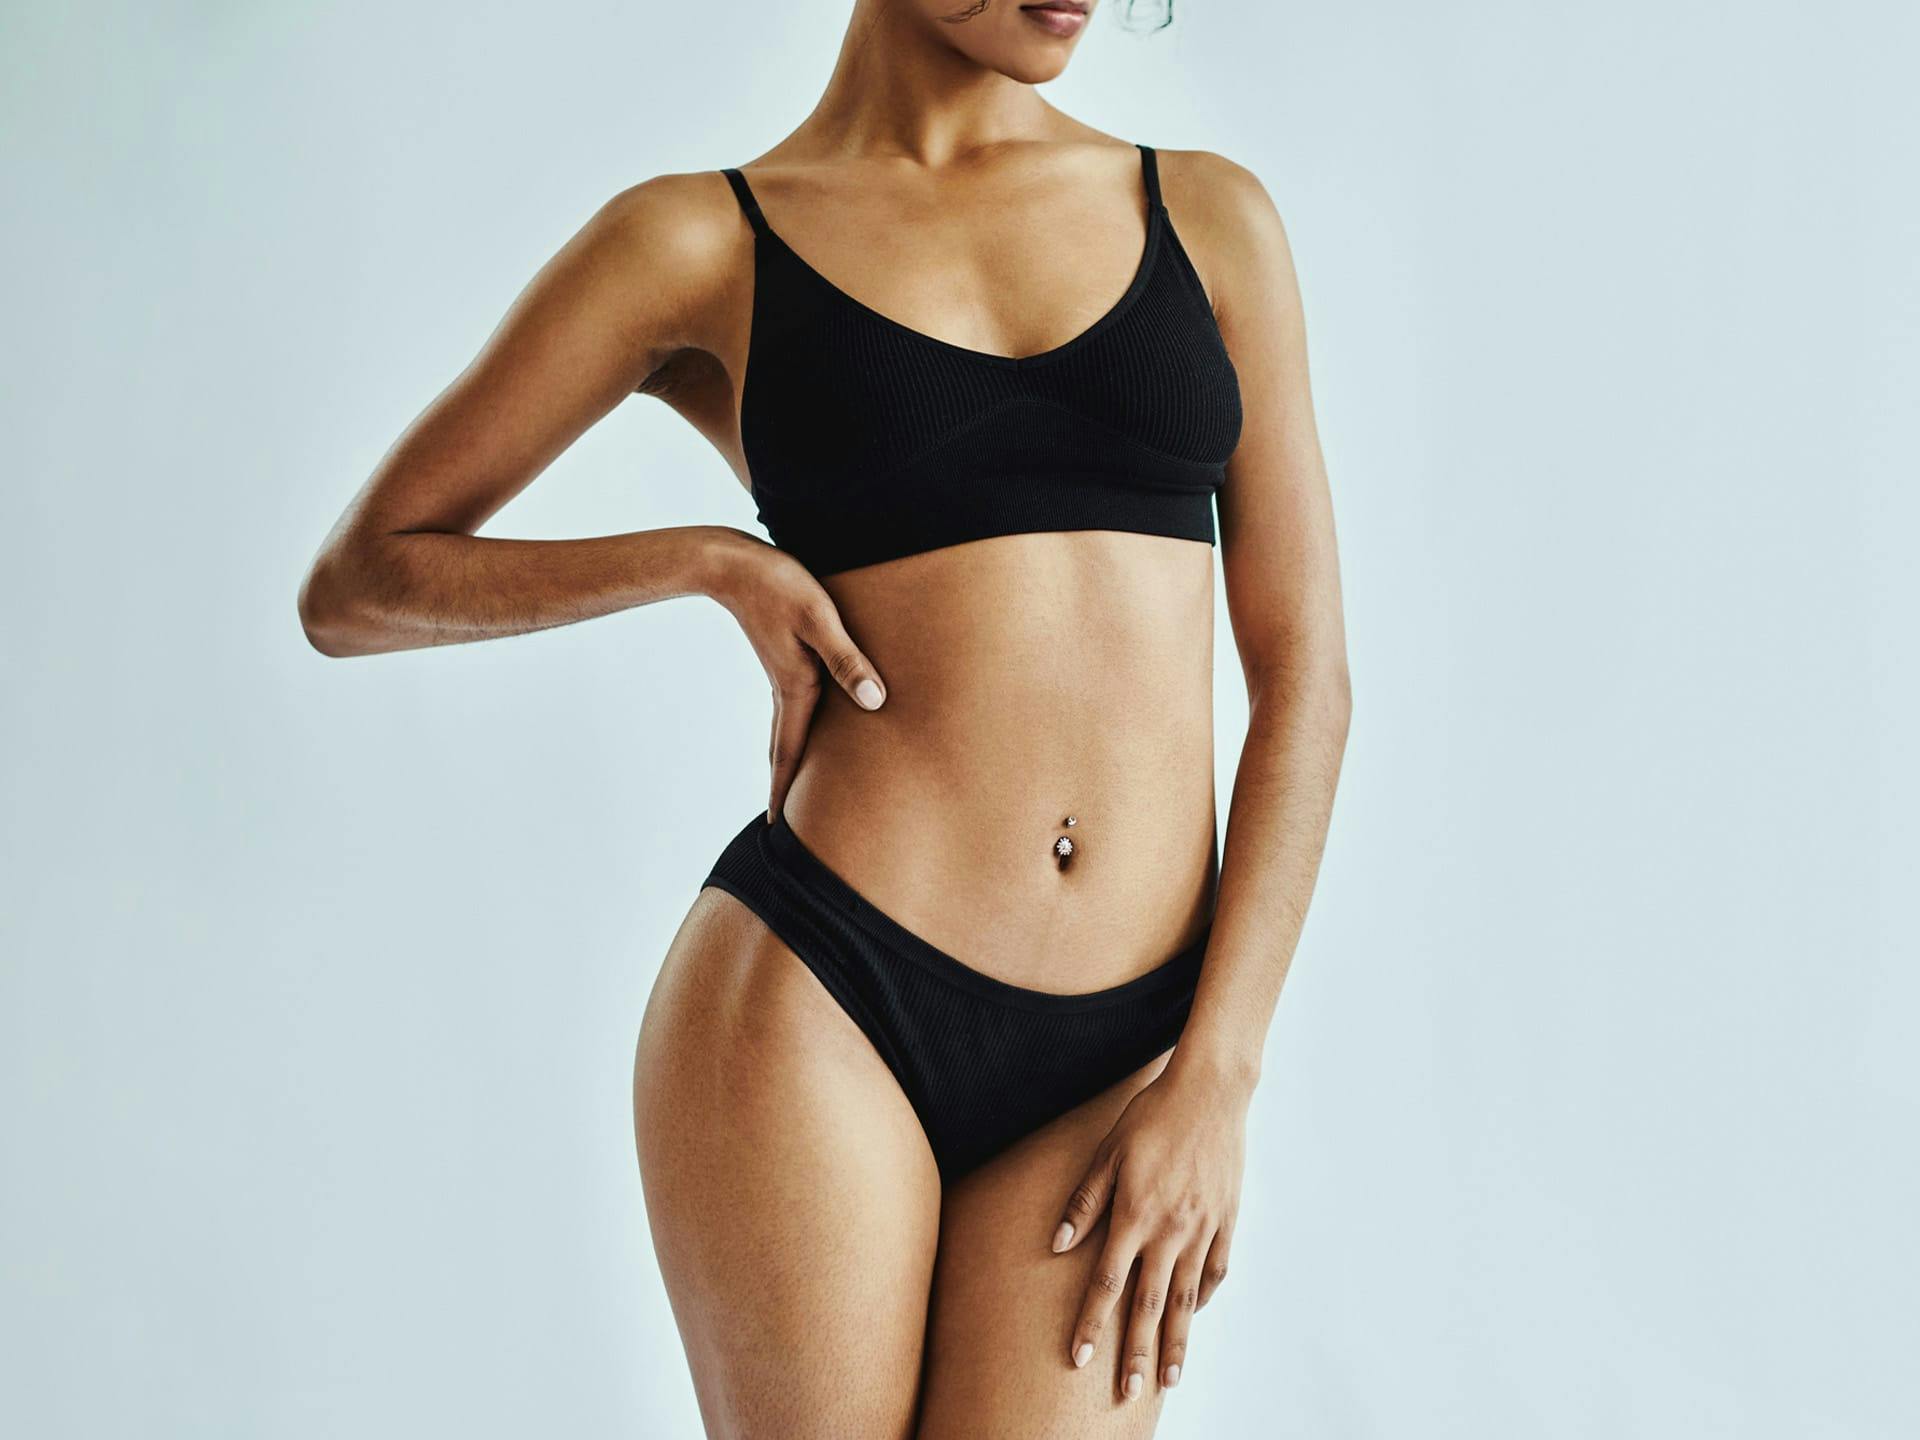 Woman in black two-piece swimsuit with hands on hip and thigh.